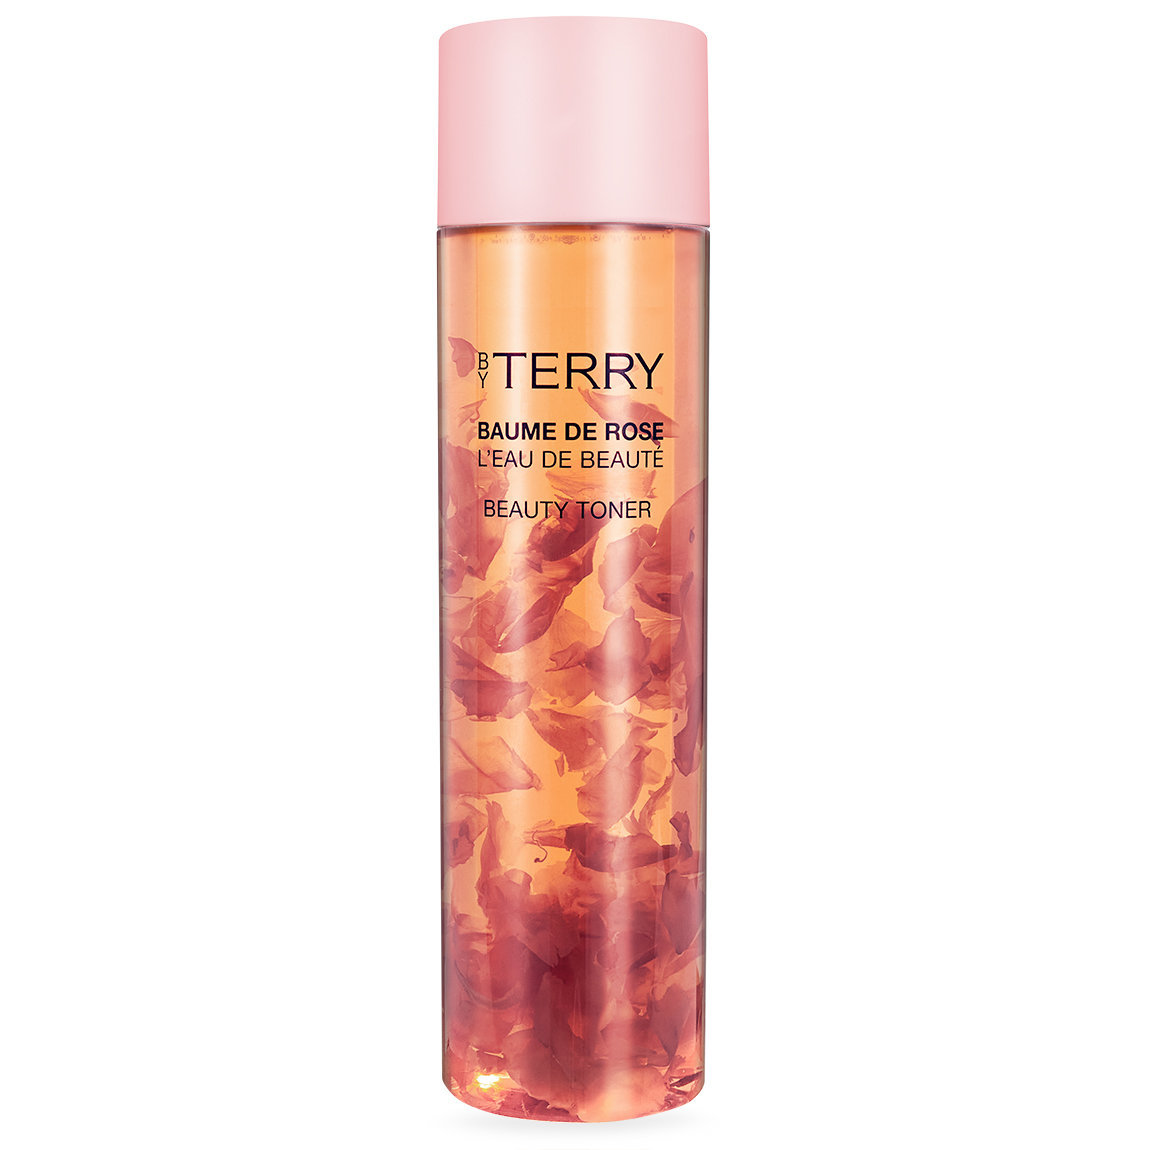 BY TERRY Baume de Rose Beauty Toner alternative view 1 - product swatch.